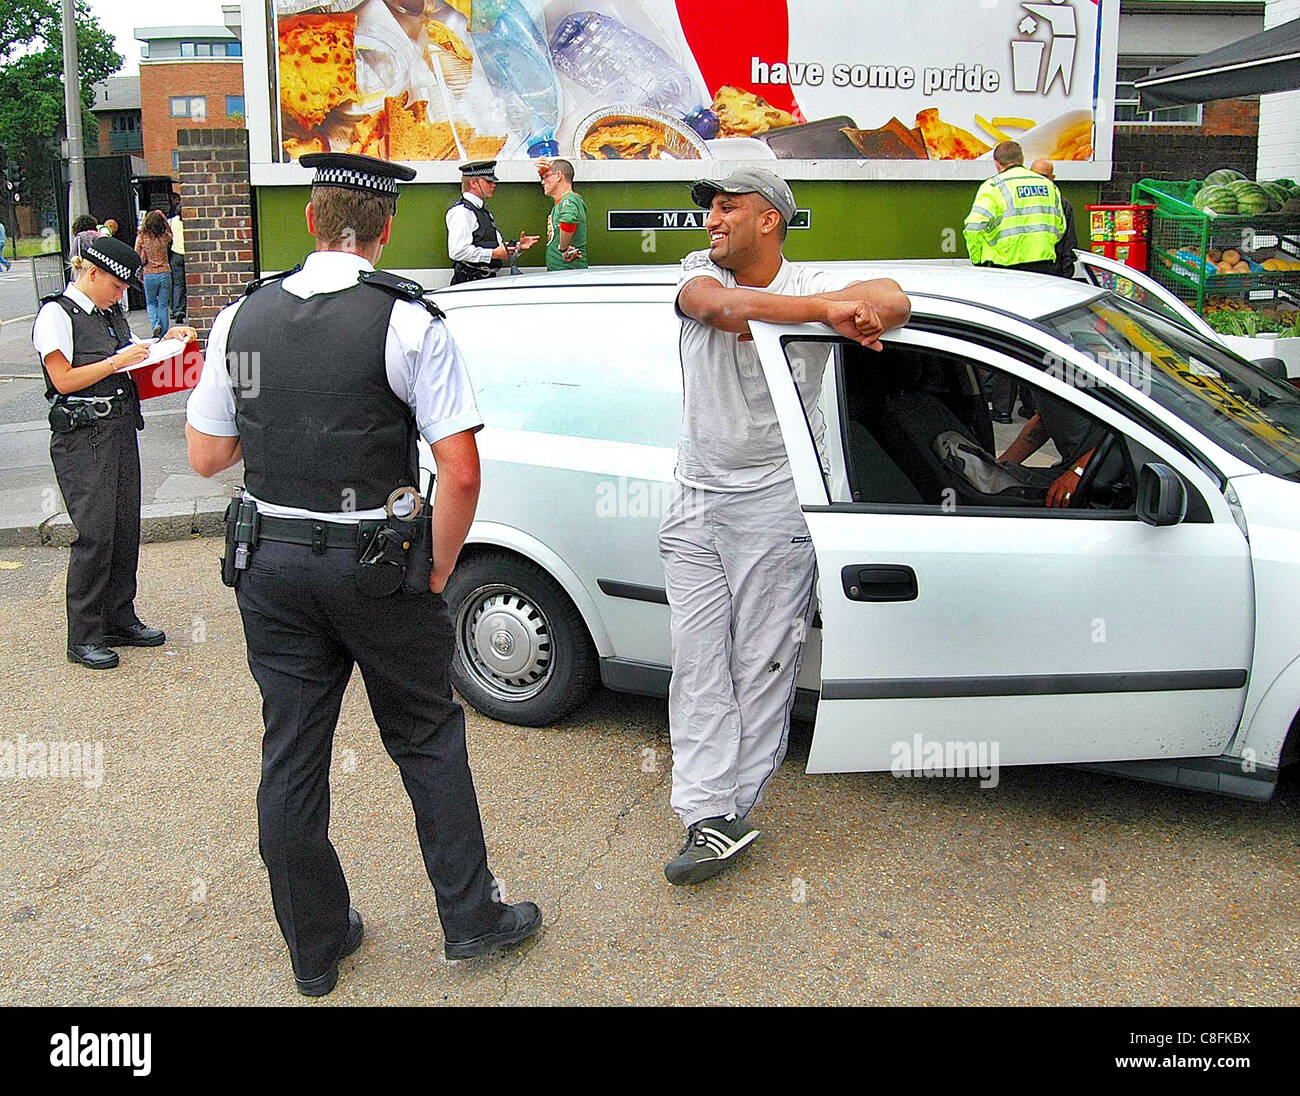 Police question a driver in a spot check on passing cars in Bounds Green, north London. The conversation was good natured. Stock Photo